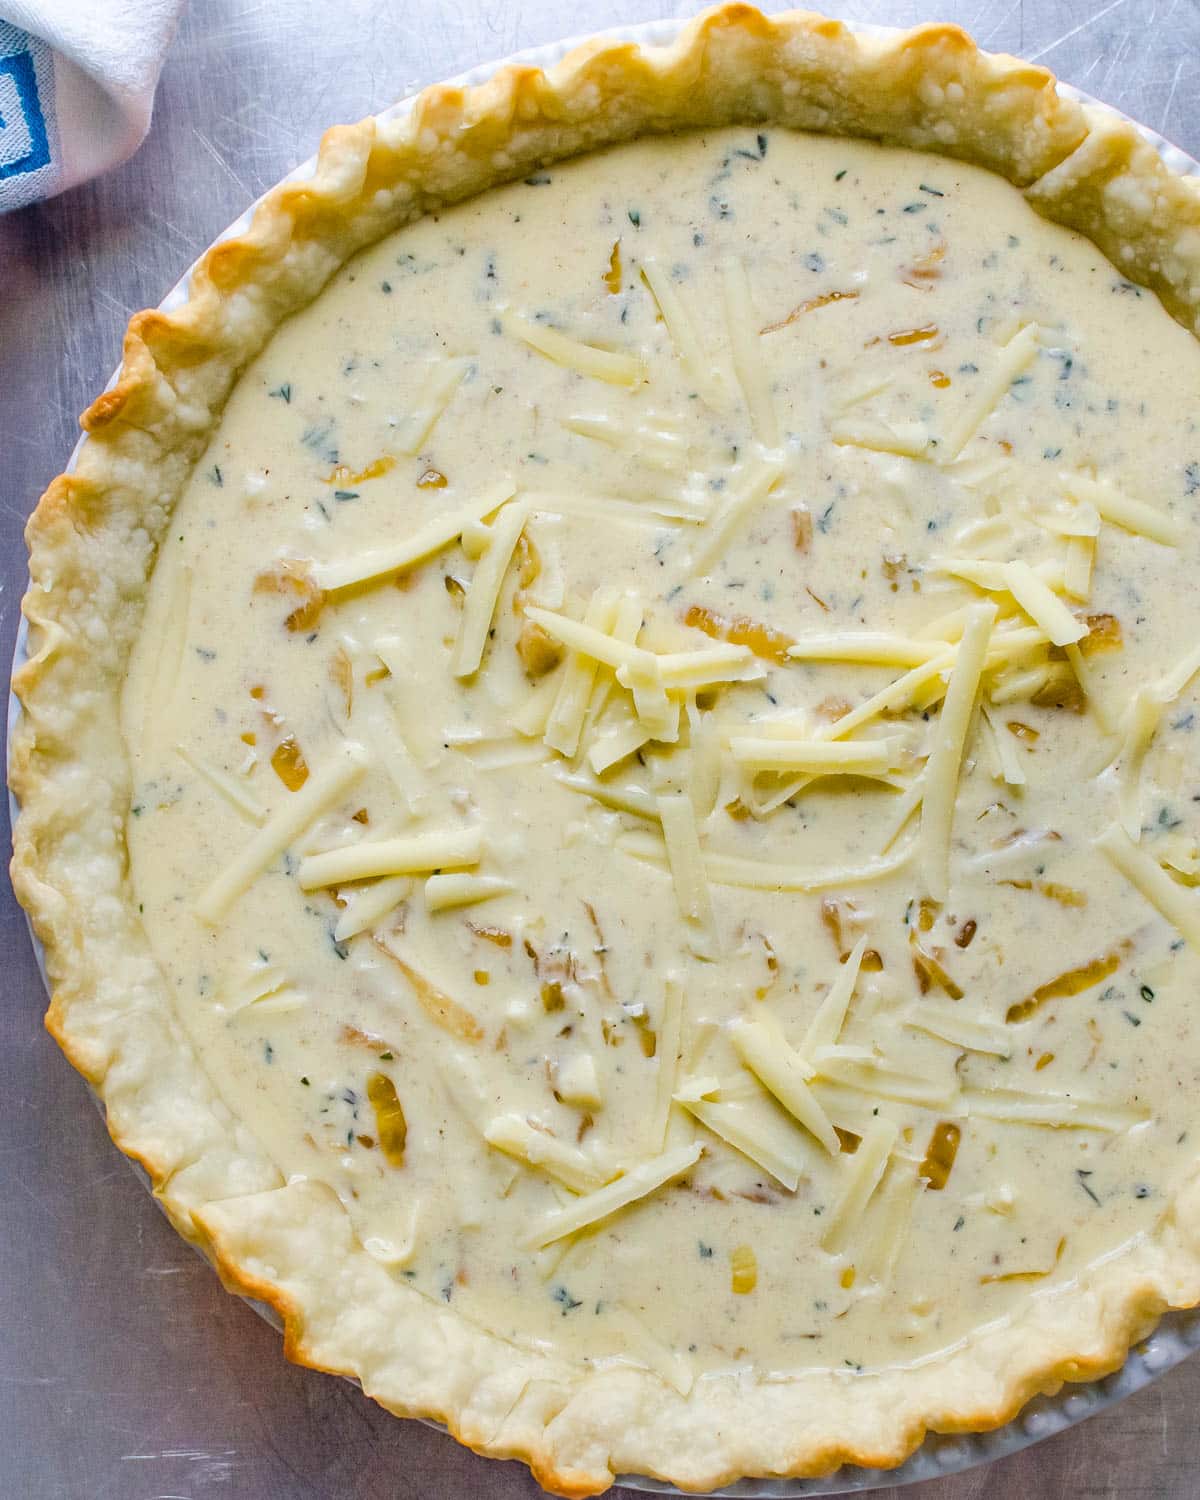 I am transferring the quiche custard to the blind-baked shell.